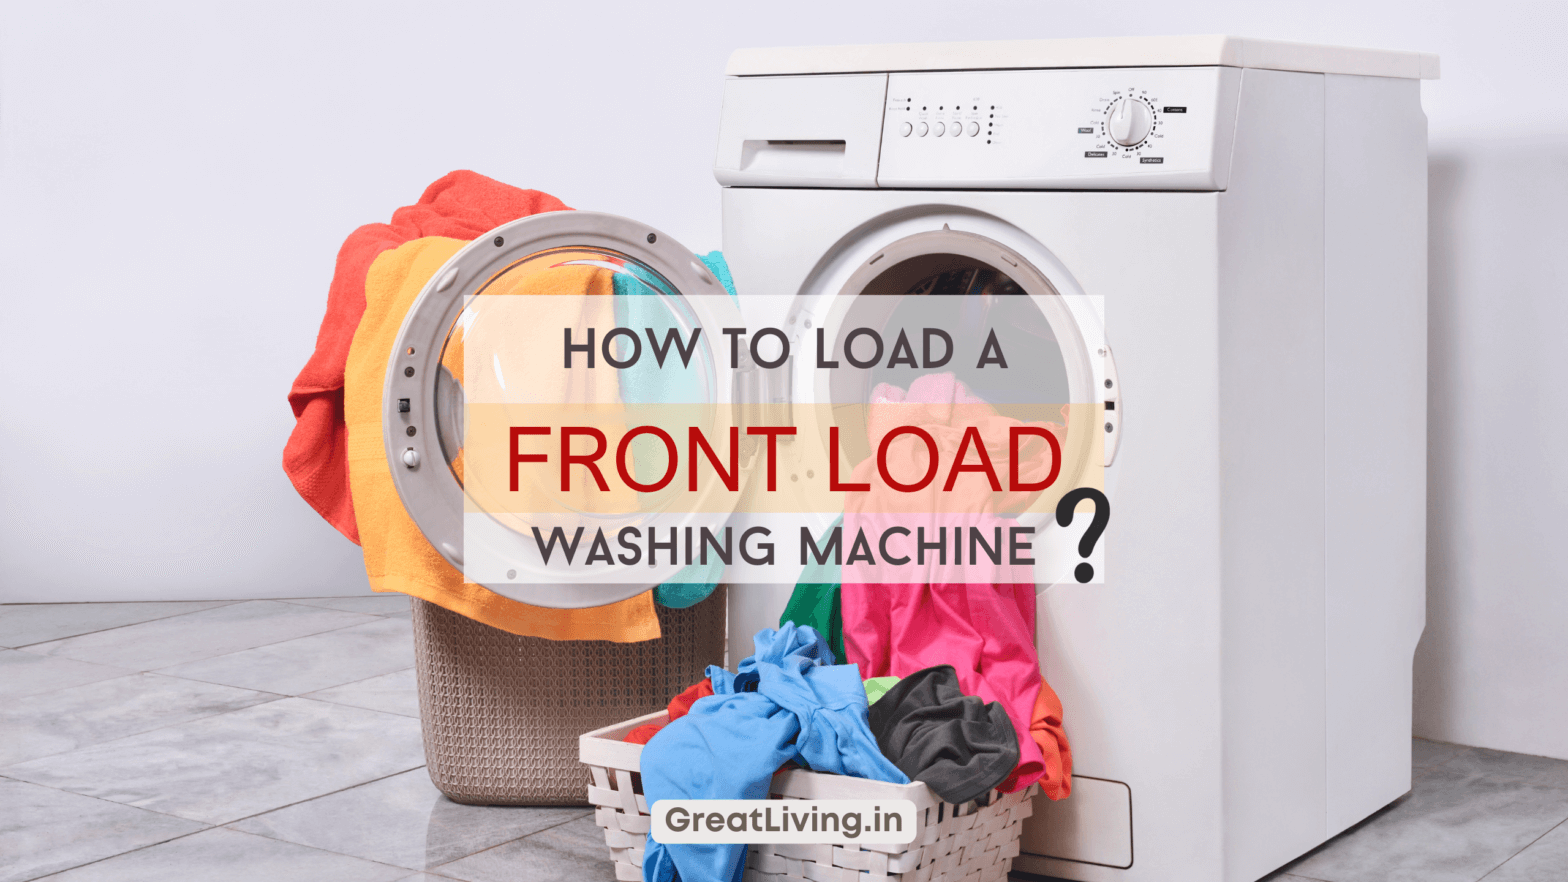 How To Load a Front Load Washing Machine?